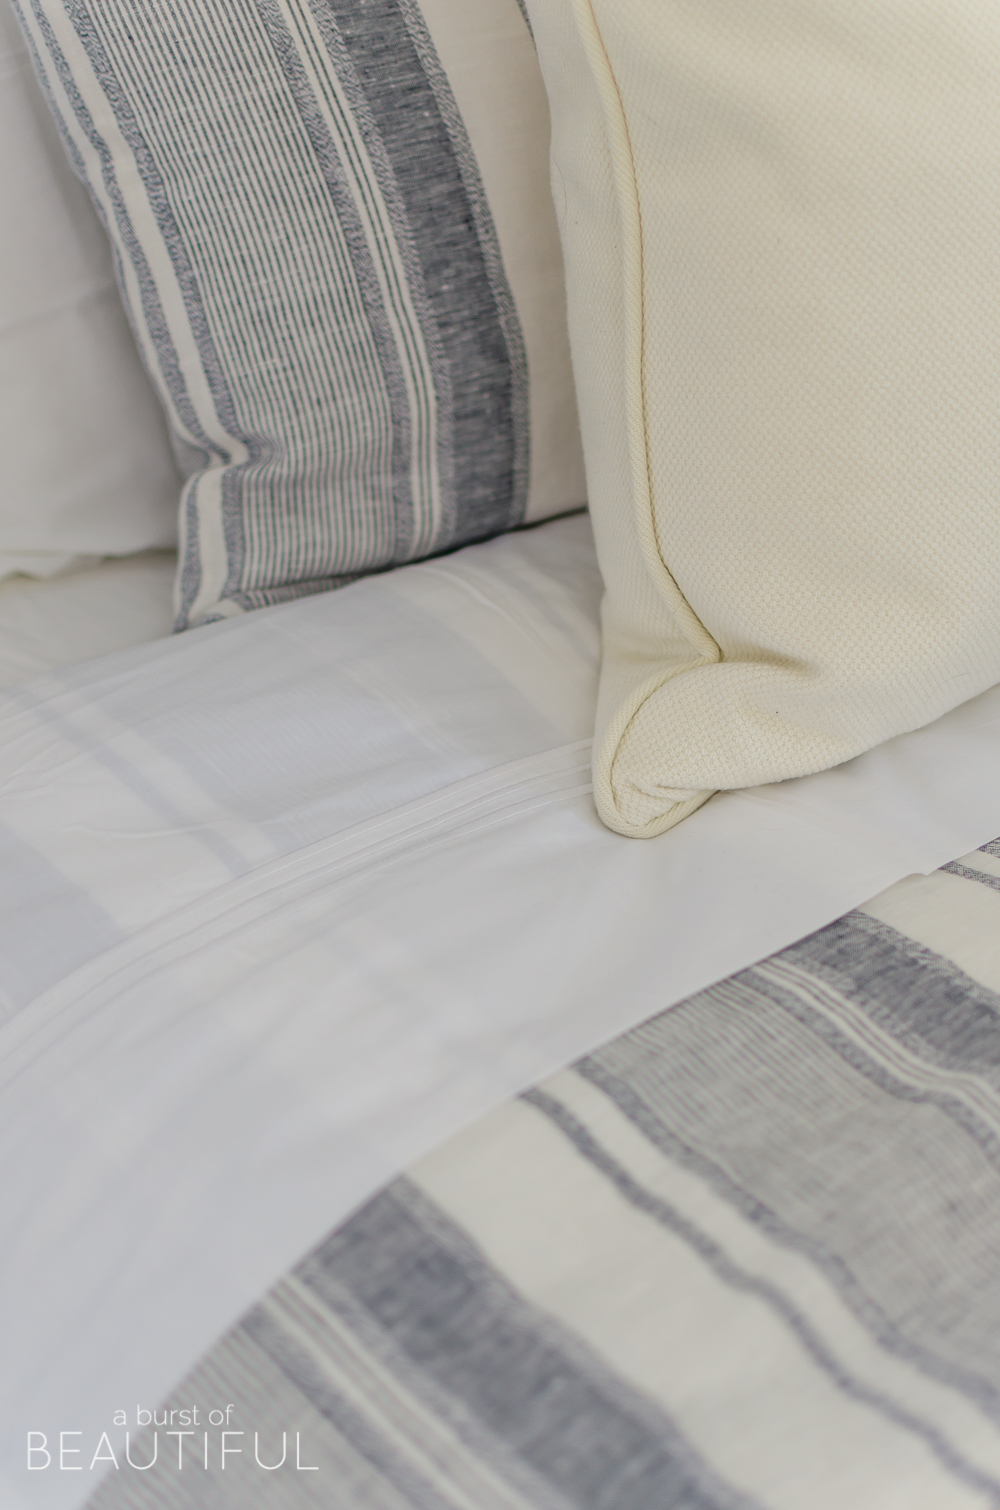 These bedding tips for a beautiful and cozy bed are simple and easy to follow